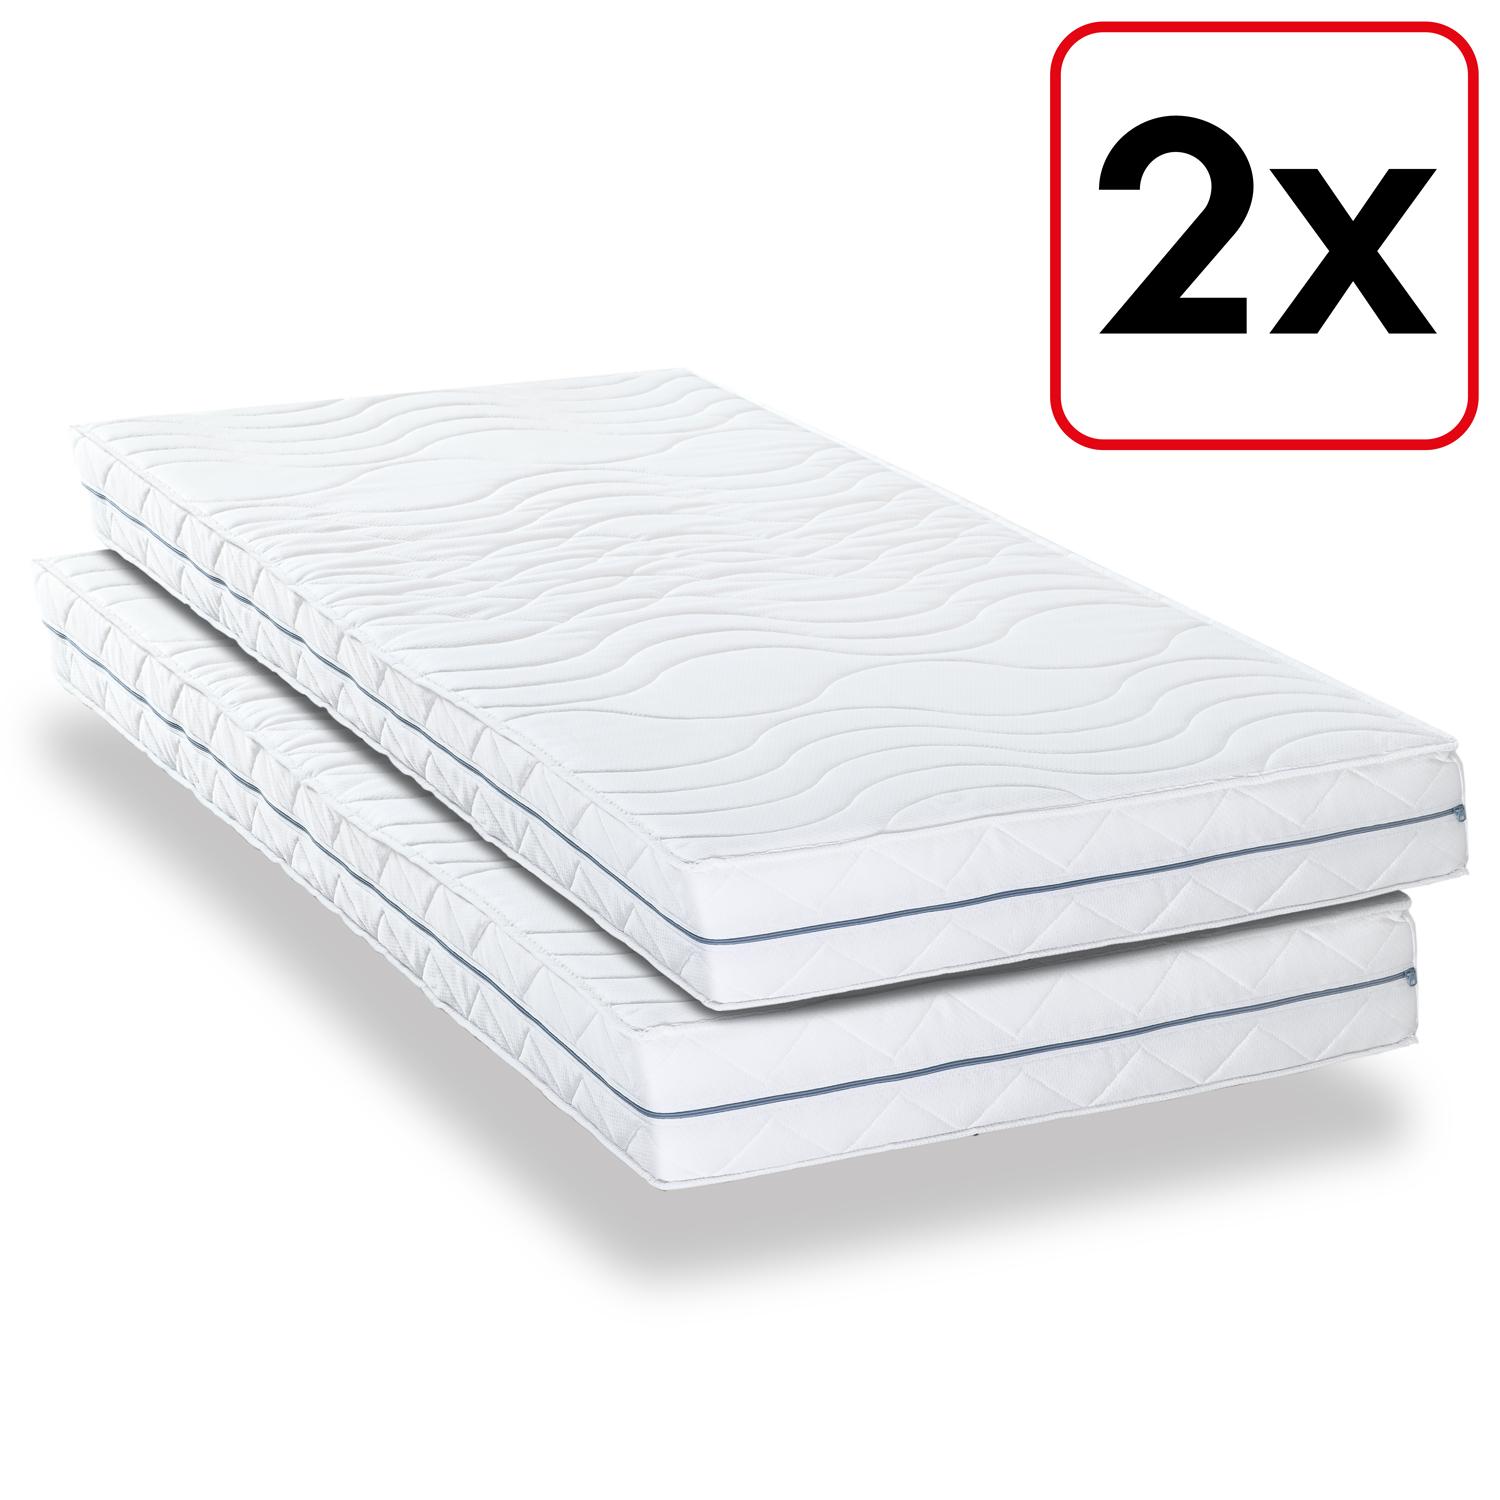 Double pack orthopaedic mattress 100x200 cm 7-zone Supportho Premium, height 18 cm, firmness level H2/H3 Twin